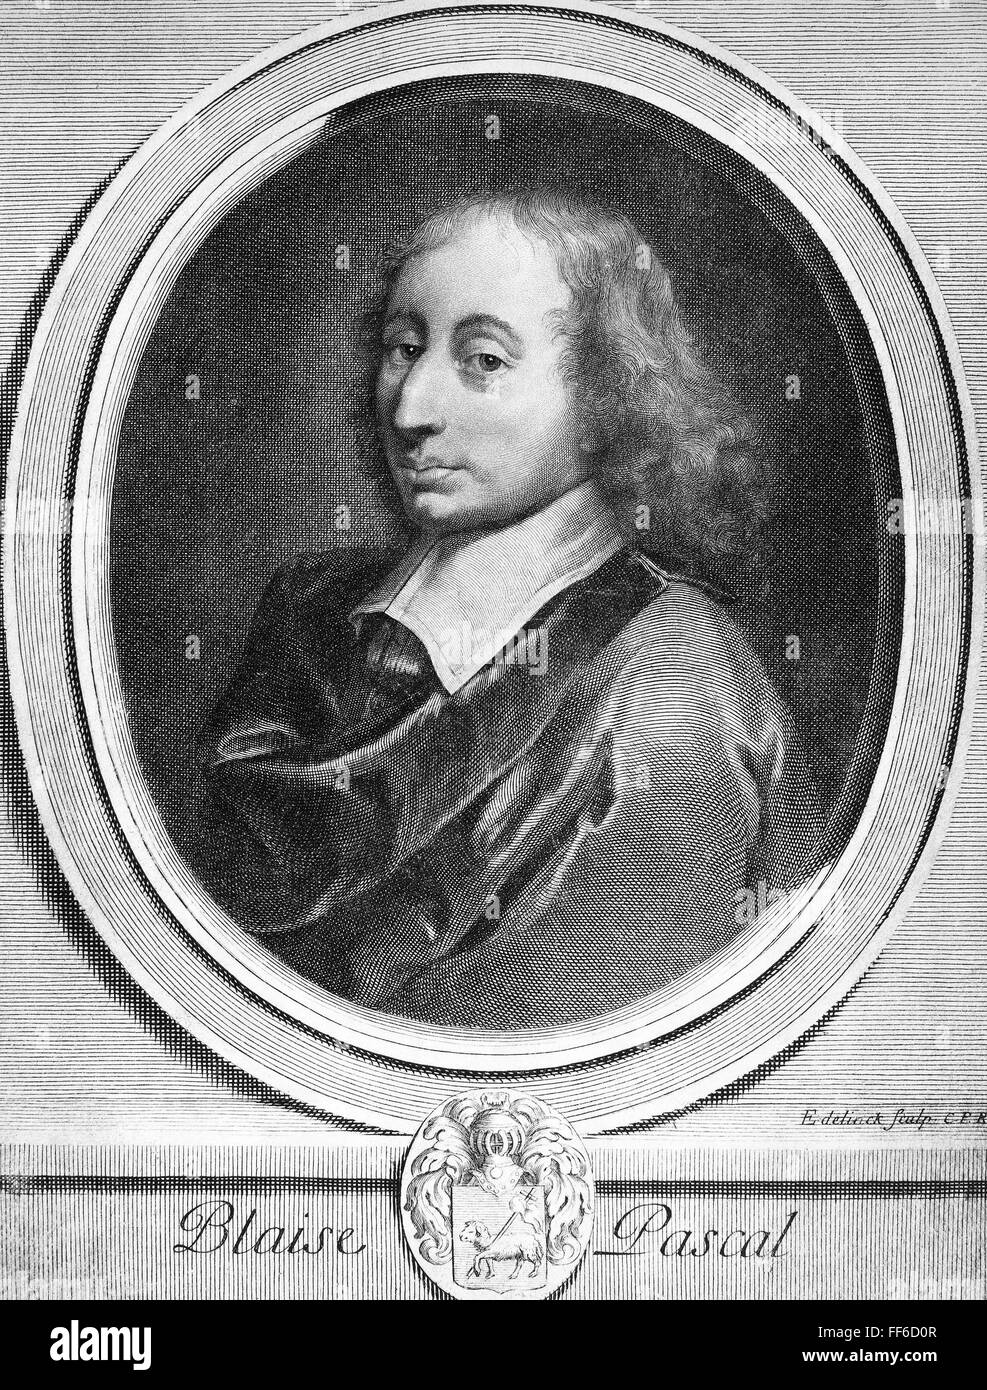 BLAISE PASCAL (1623-1662). /nFrench scientist and philosopher. Copper engraving by Gerard Edelinck (1640-1707). Stock Photo